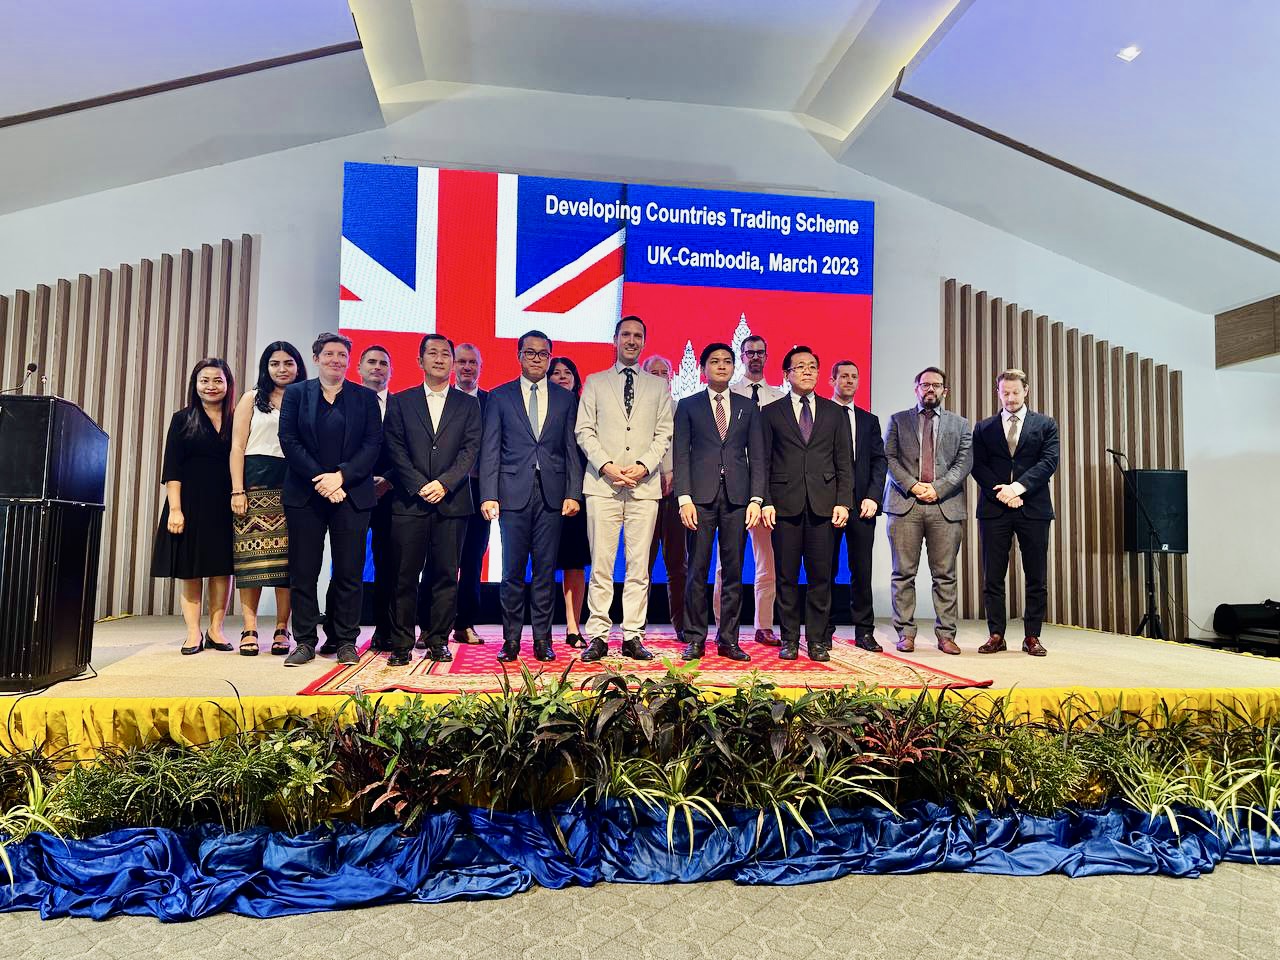 Launch of the UK’s Developing Countries Trading Schemes in Cambodia